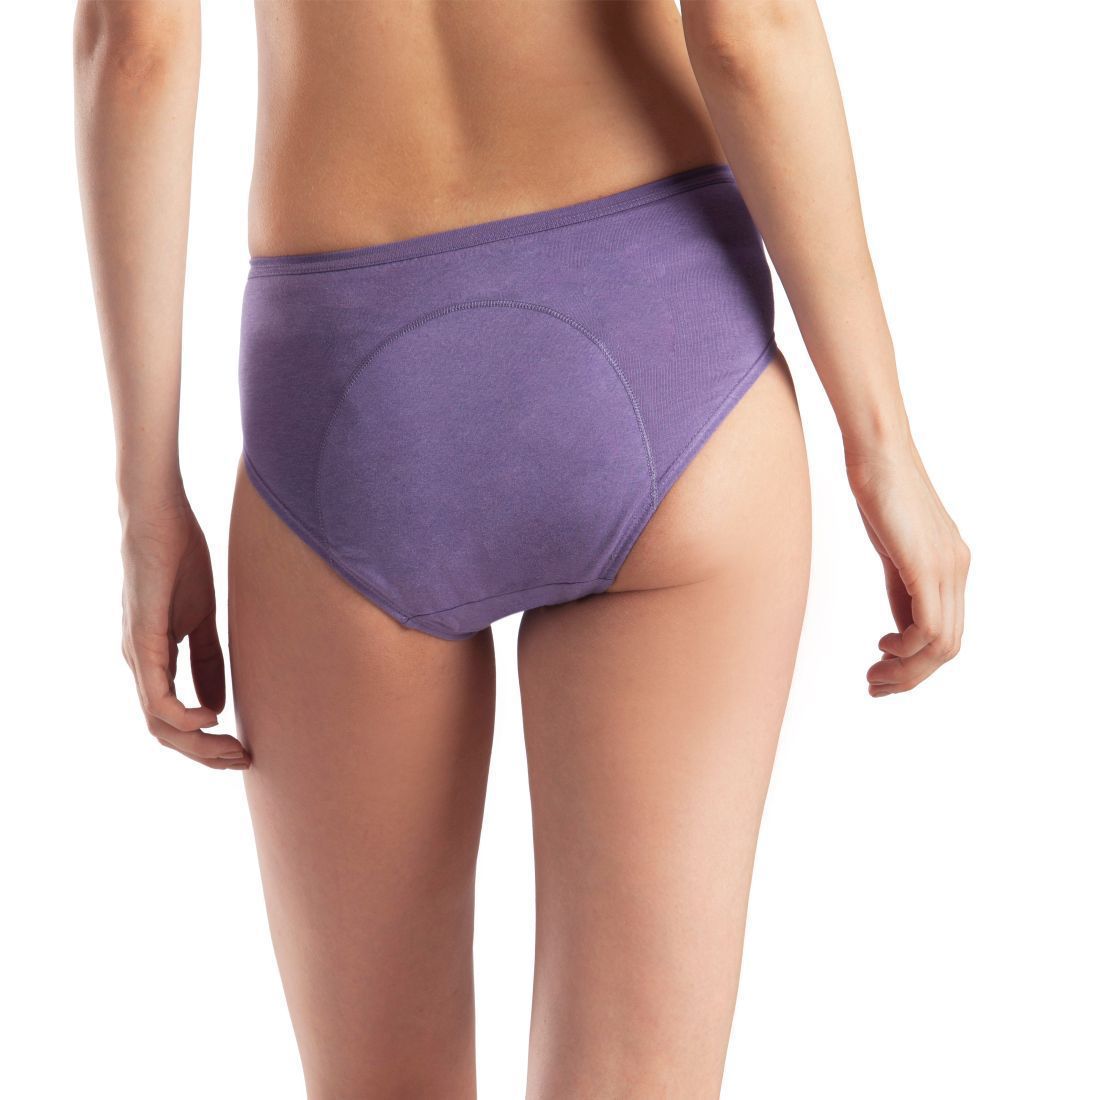 Lavos Performance - No Stain Period Panty -Lavender- XL